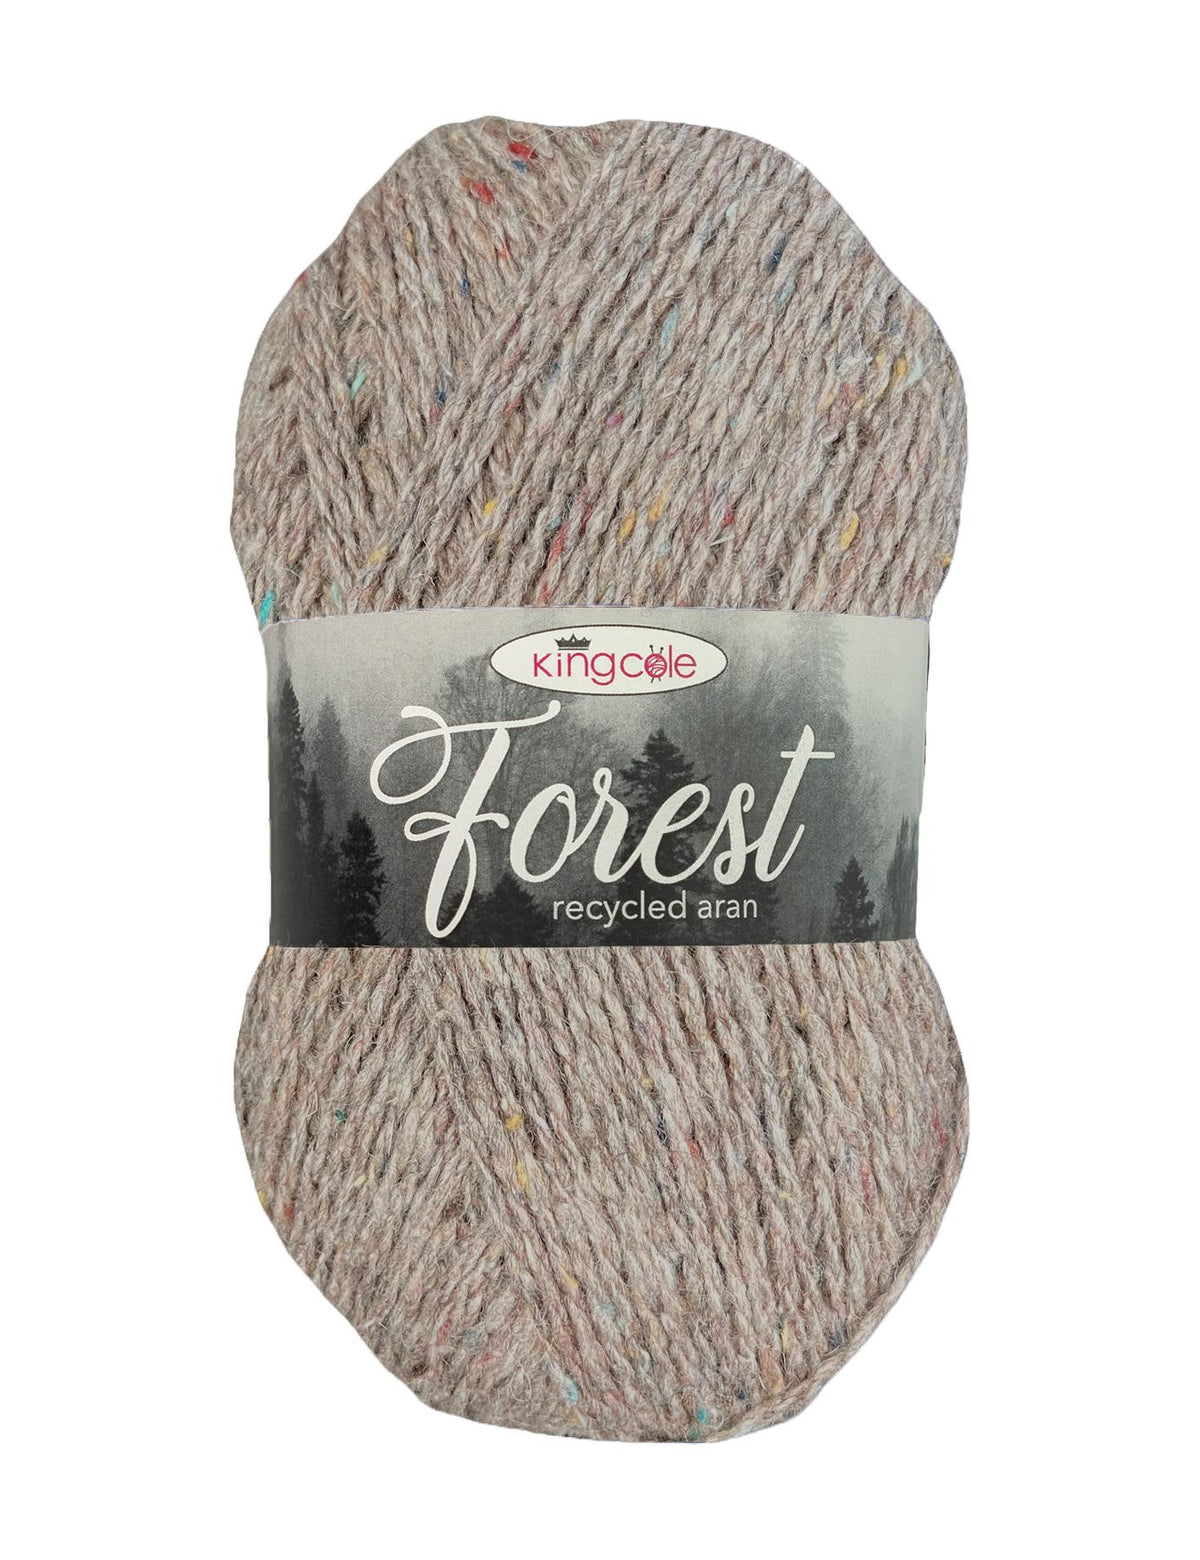 Epping Forest 100% recycled aran yarn by King Cole (100g)